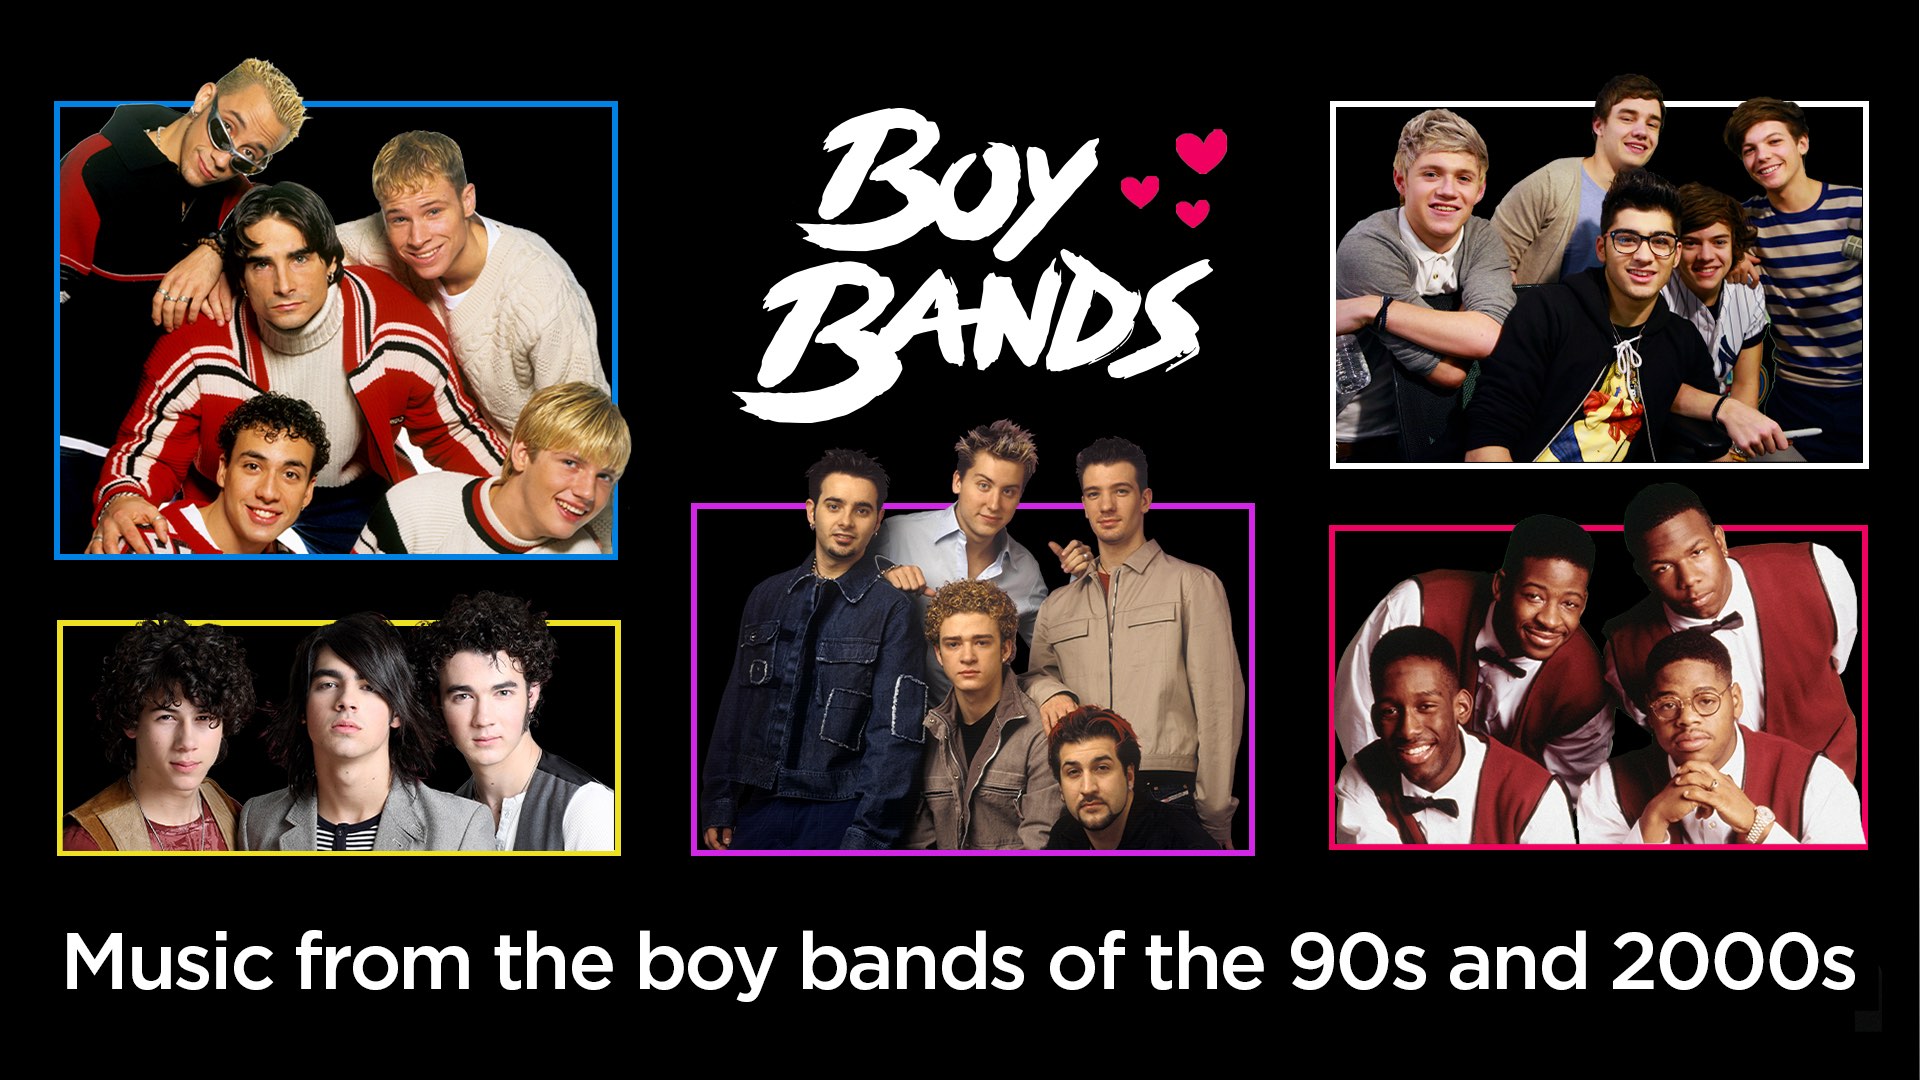 SiriusXM Boy Bands Channel: Music from the boy bands of the '90s and 2000s